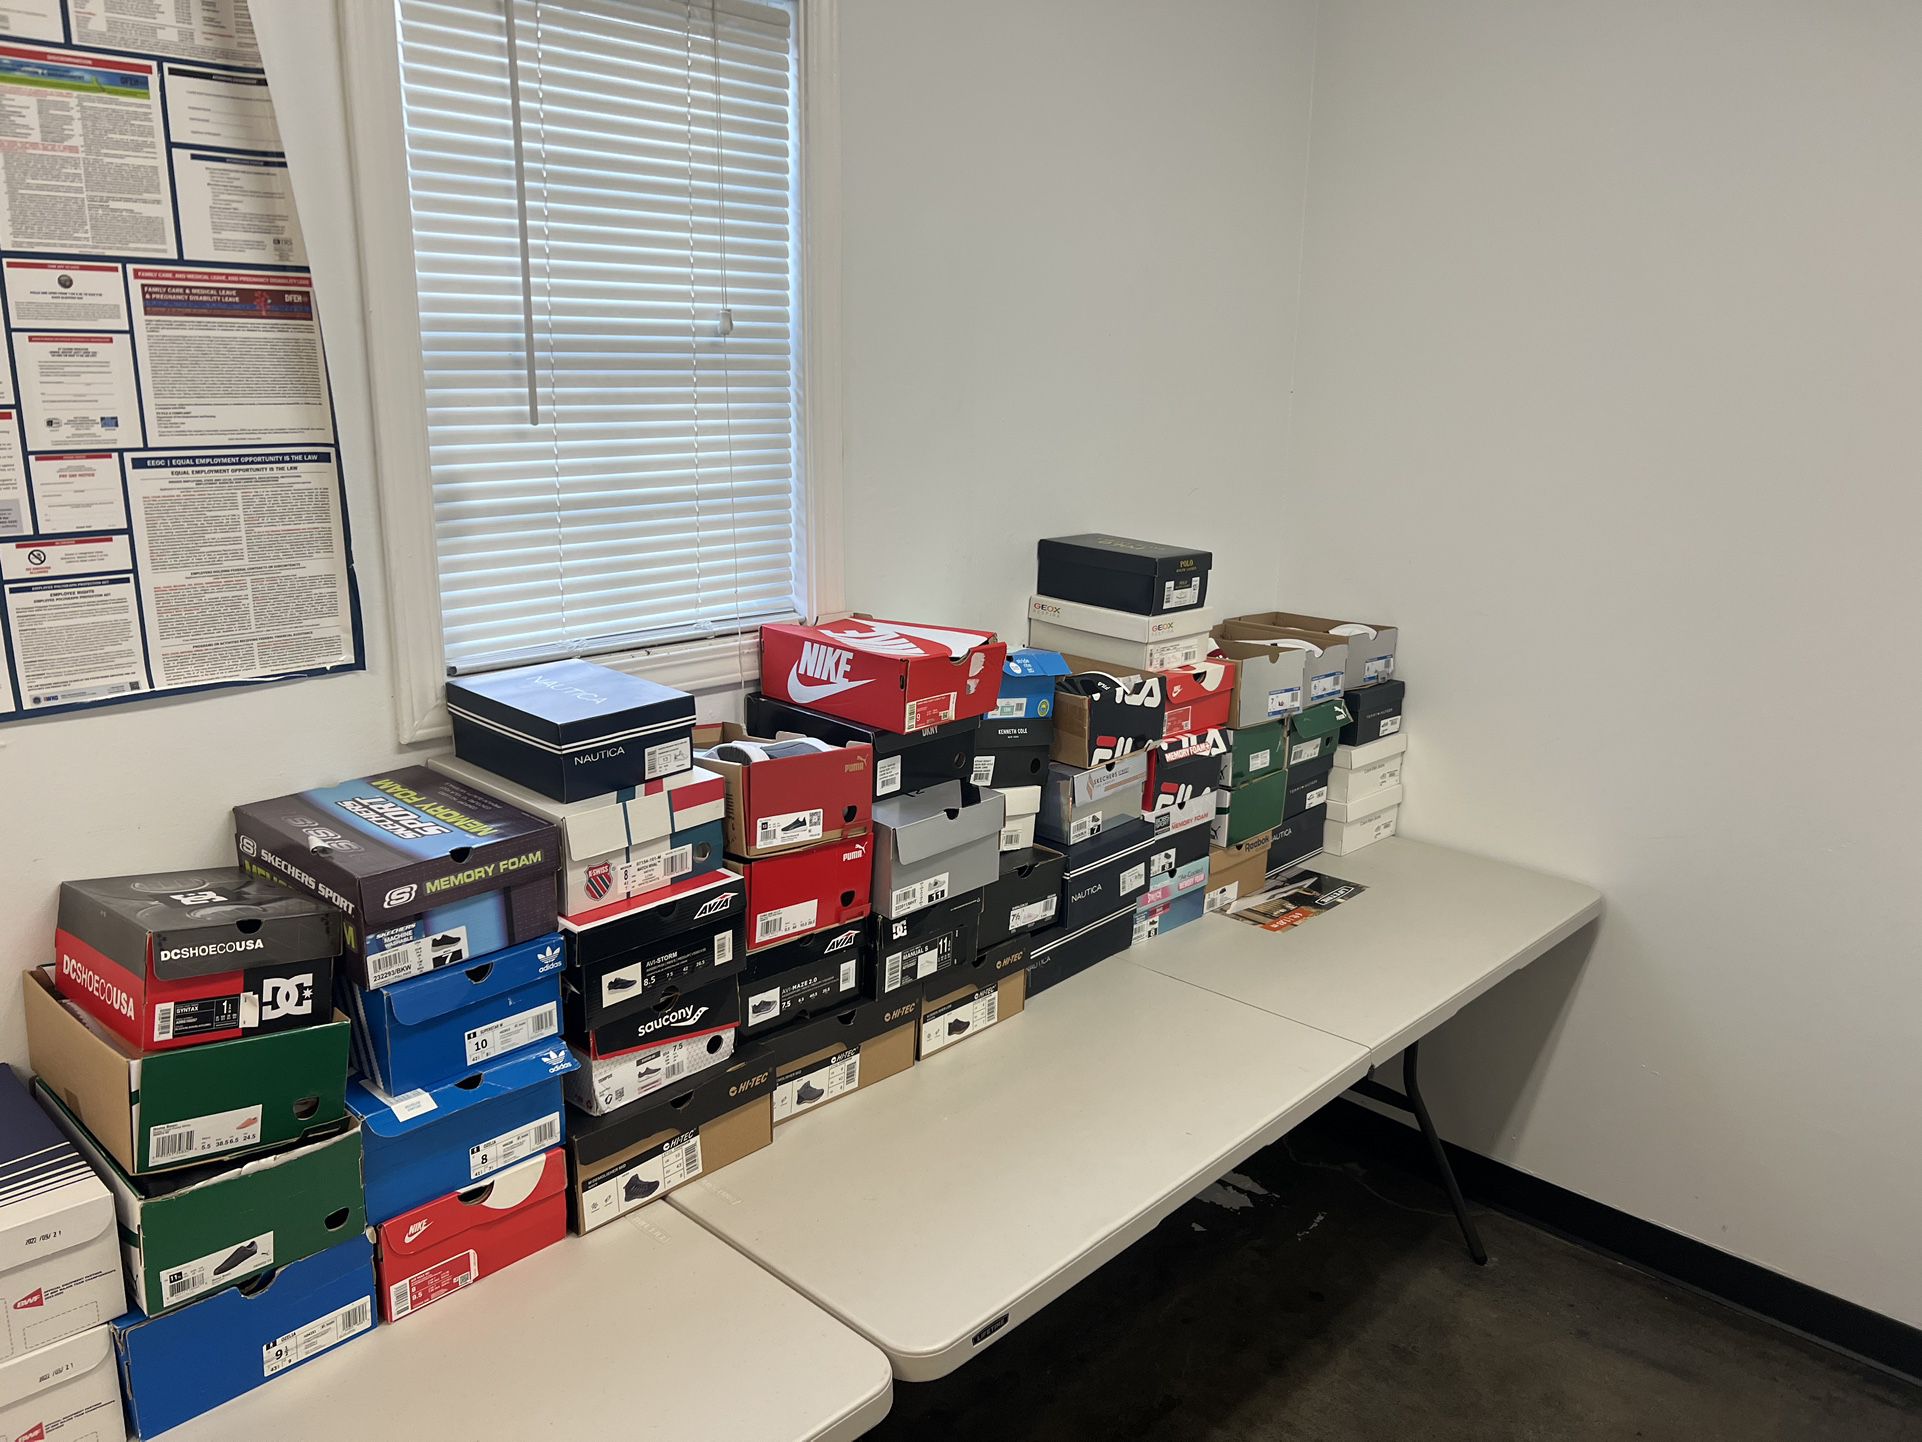 62 New Pairs Shoes 